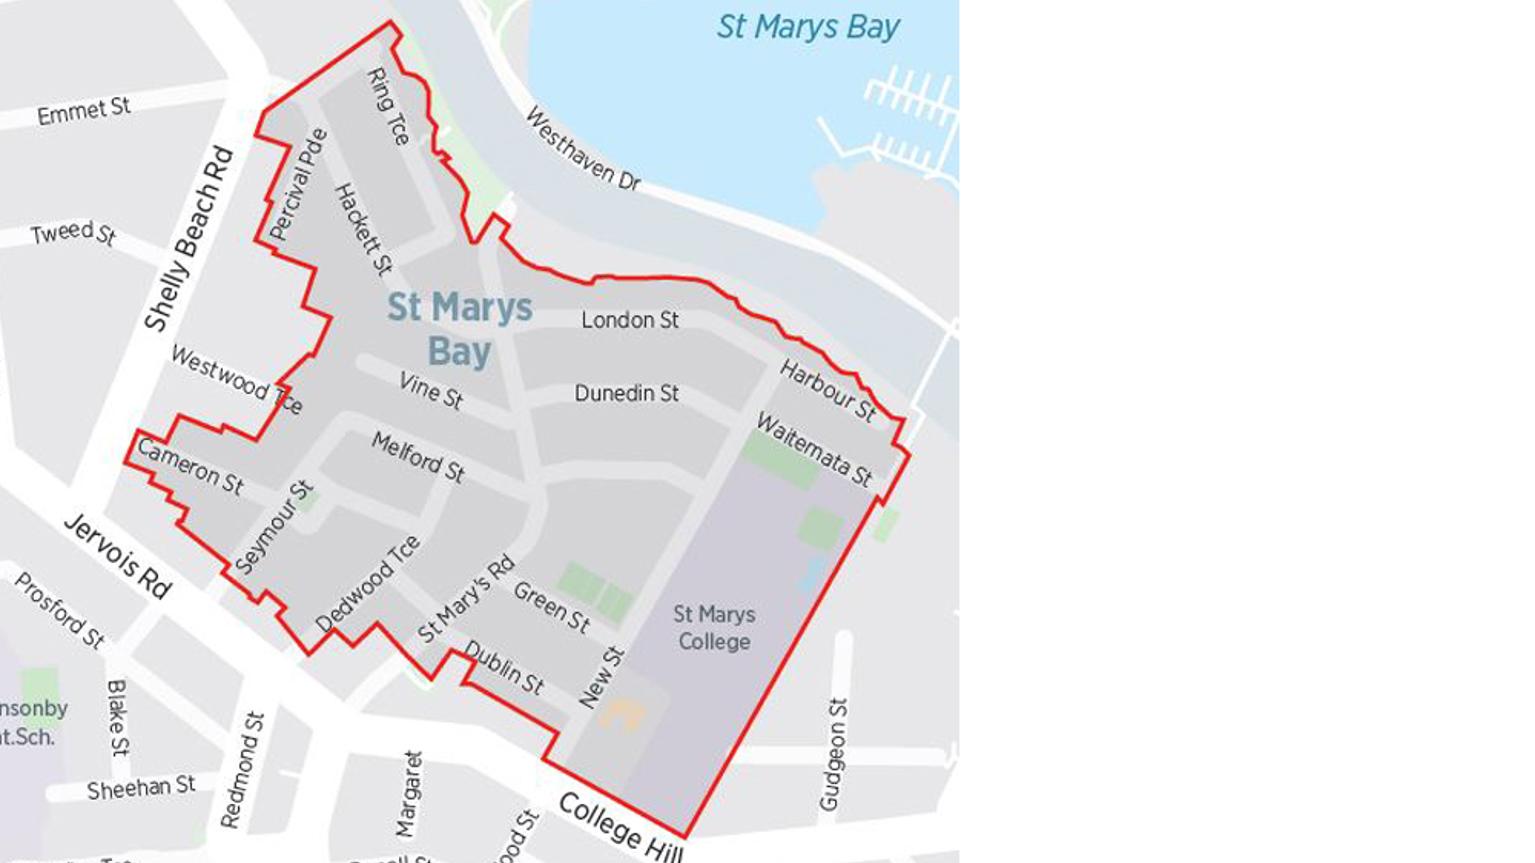 Map of St Mary's Bay with the resident parking zone boundaries indicated with red lines.